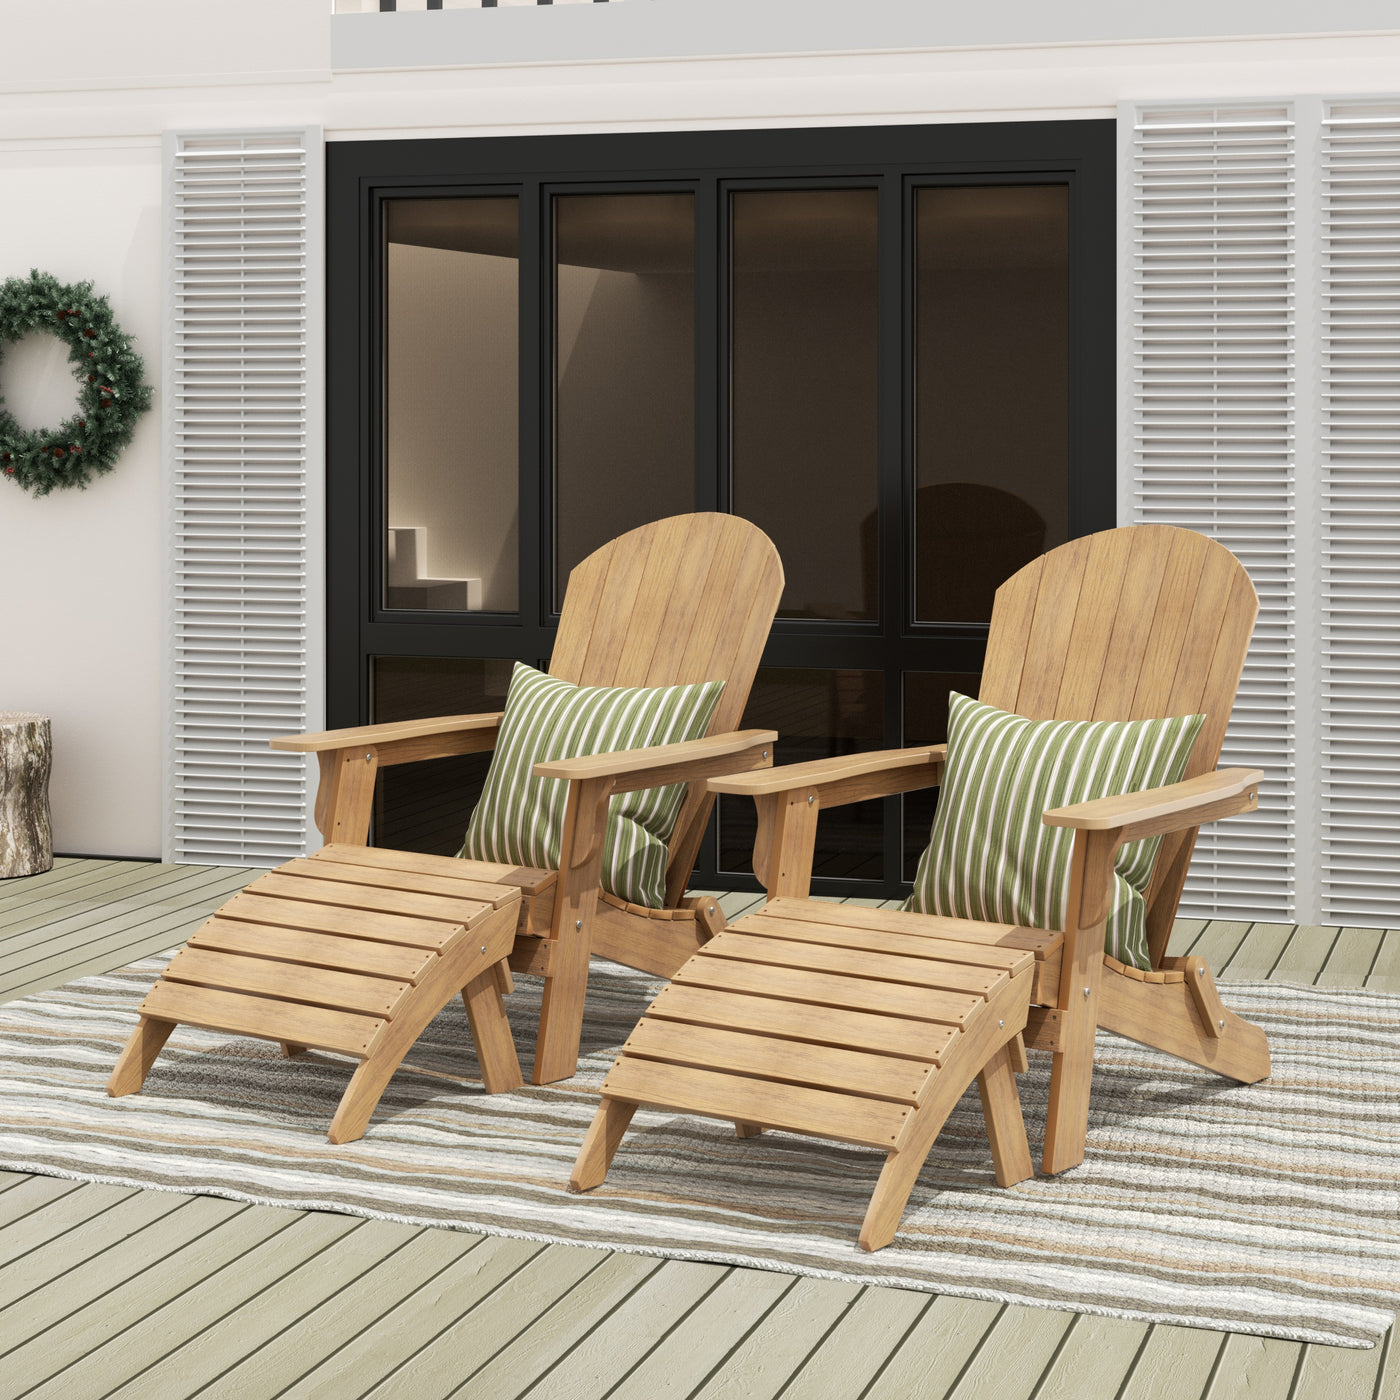 Tuscany HIPS 4-Piece Outdoor Folding Adirondack Chair With Folding Ottoman Set